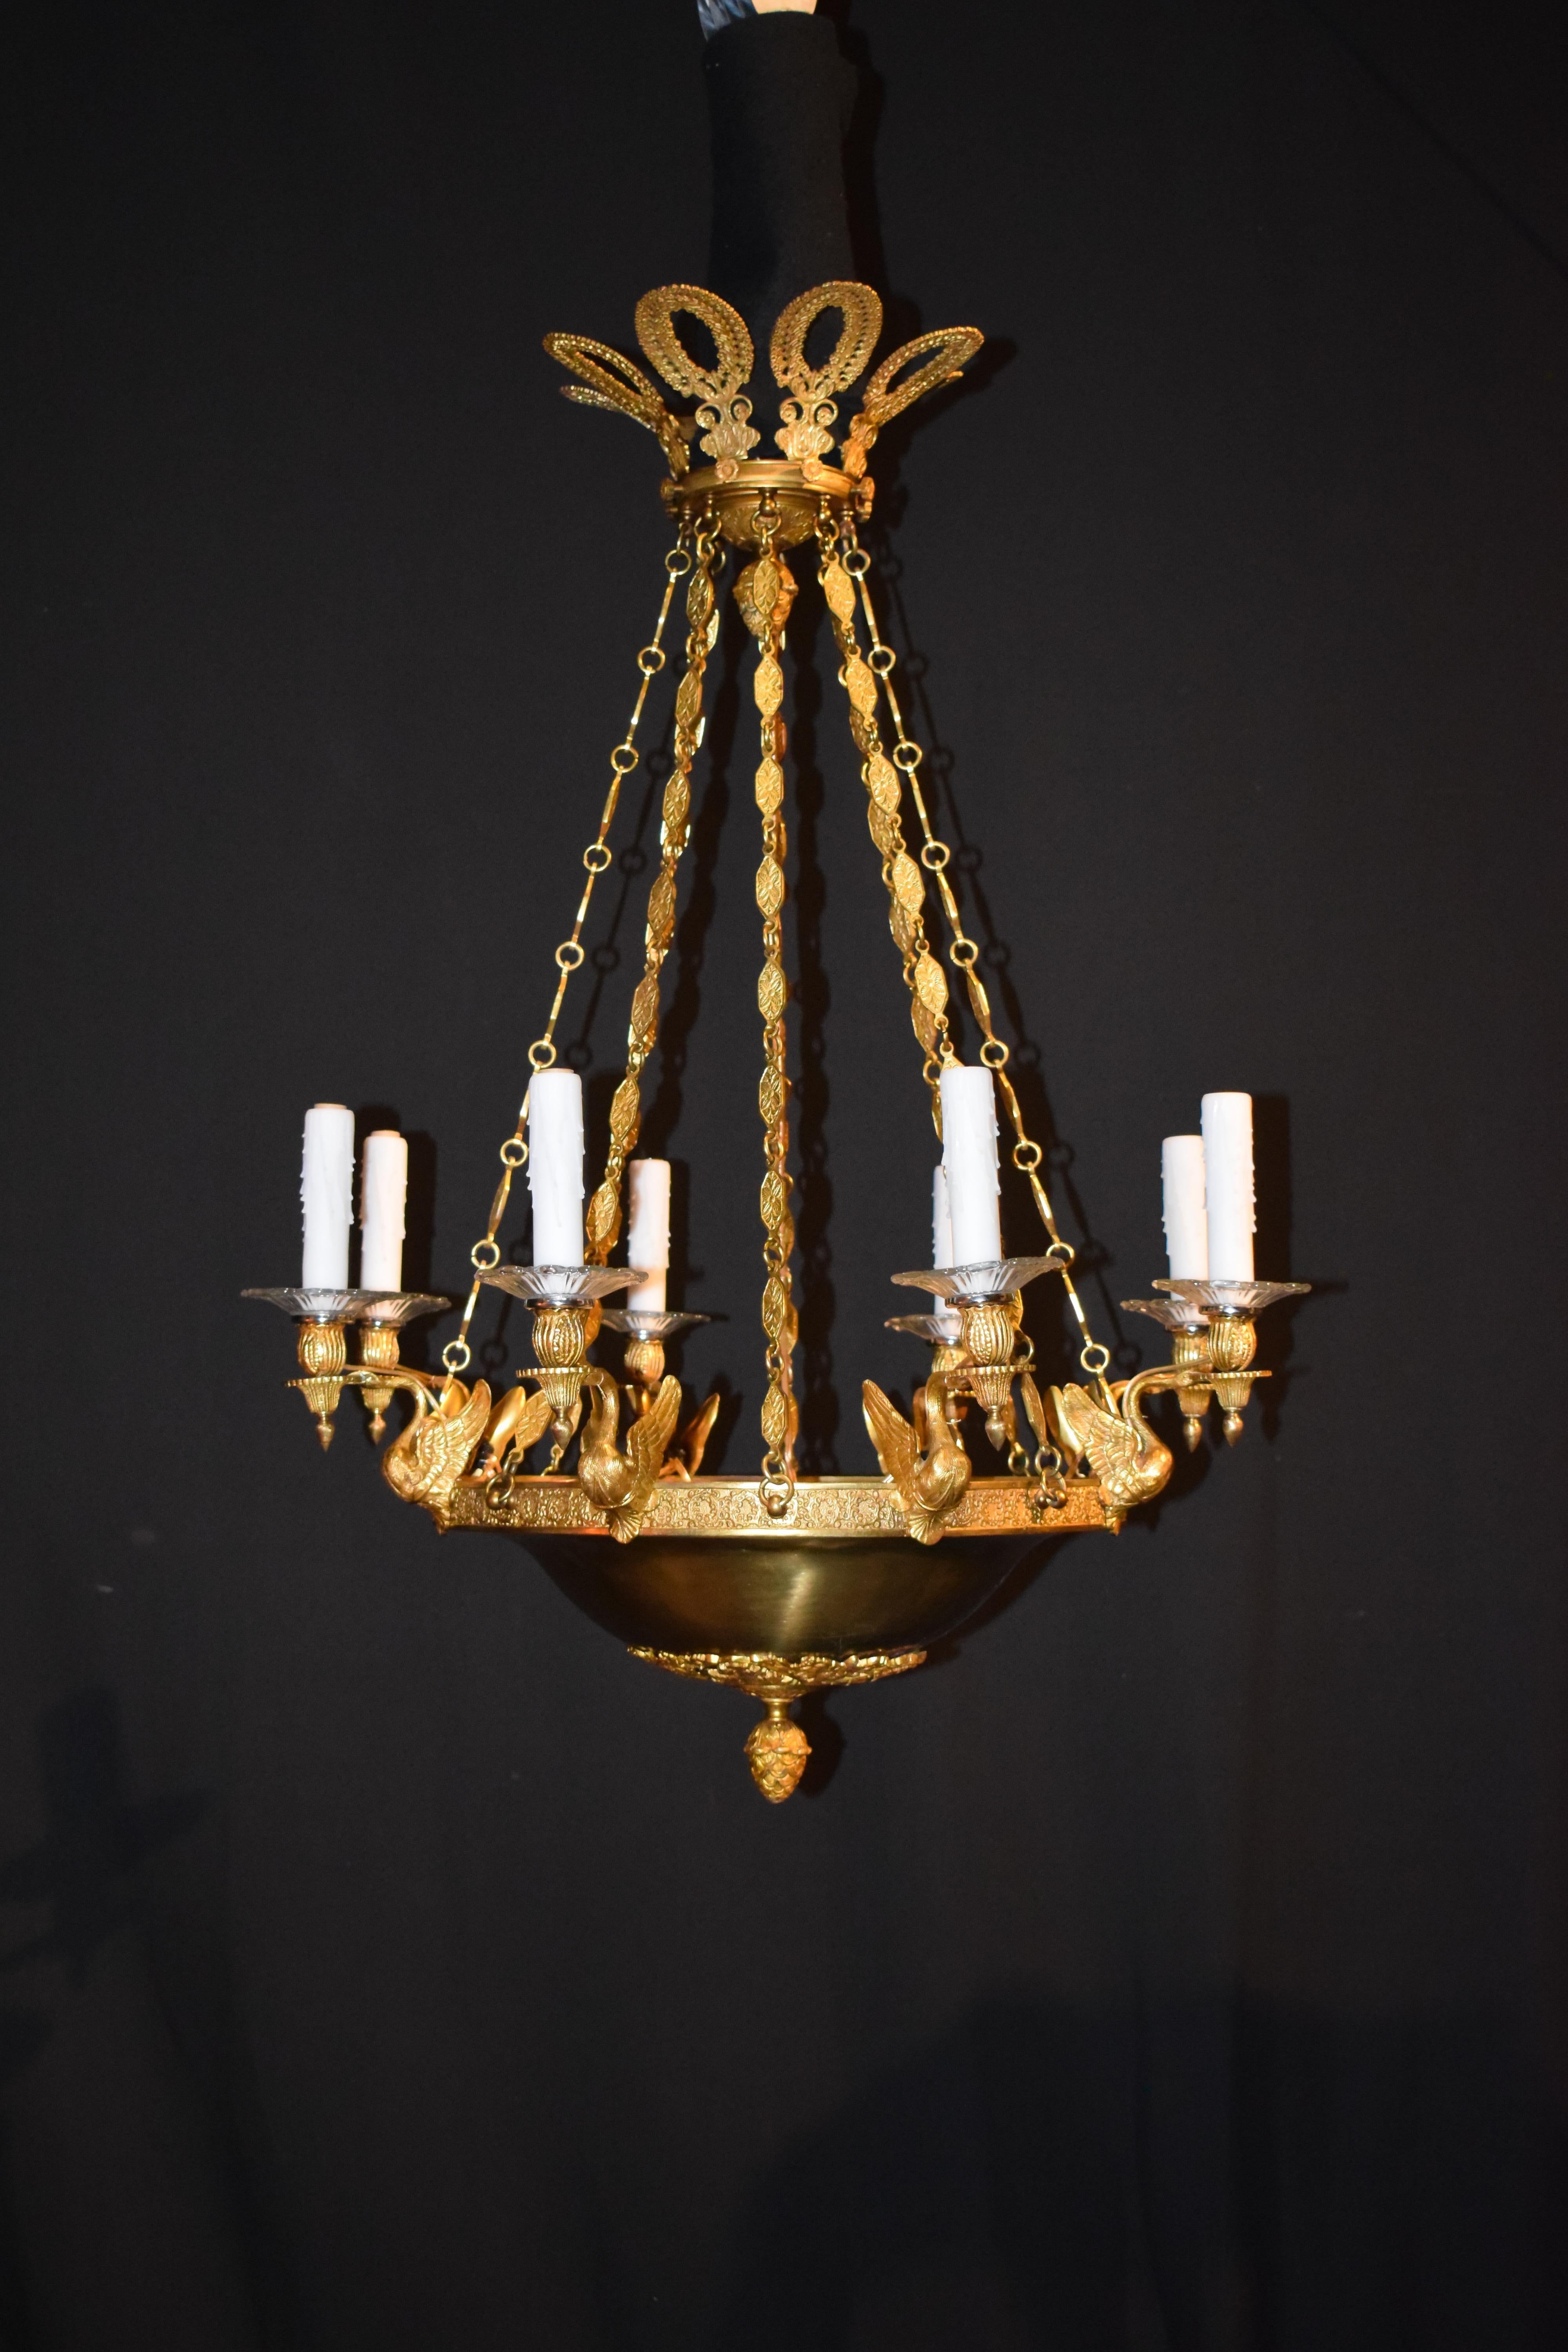 A Very Fine Gilt Bronze Chandelier in the Empire taste, featuring gilt bronze swans issuing lights. An exquisite eight wreath top canopy. 8 lights. 
France, circa 1900.
Dimensions: Height 39